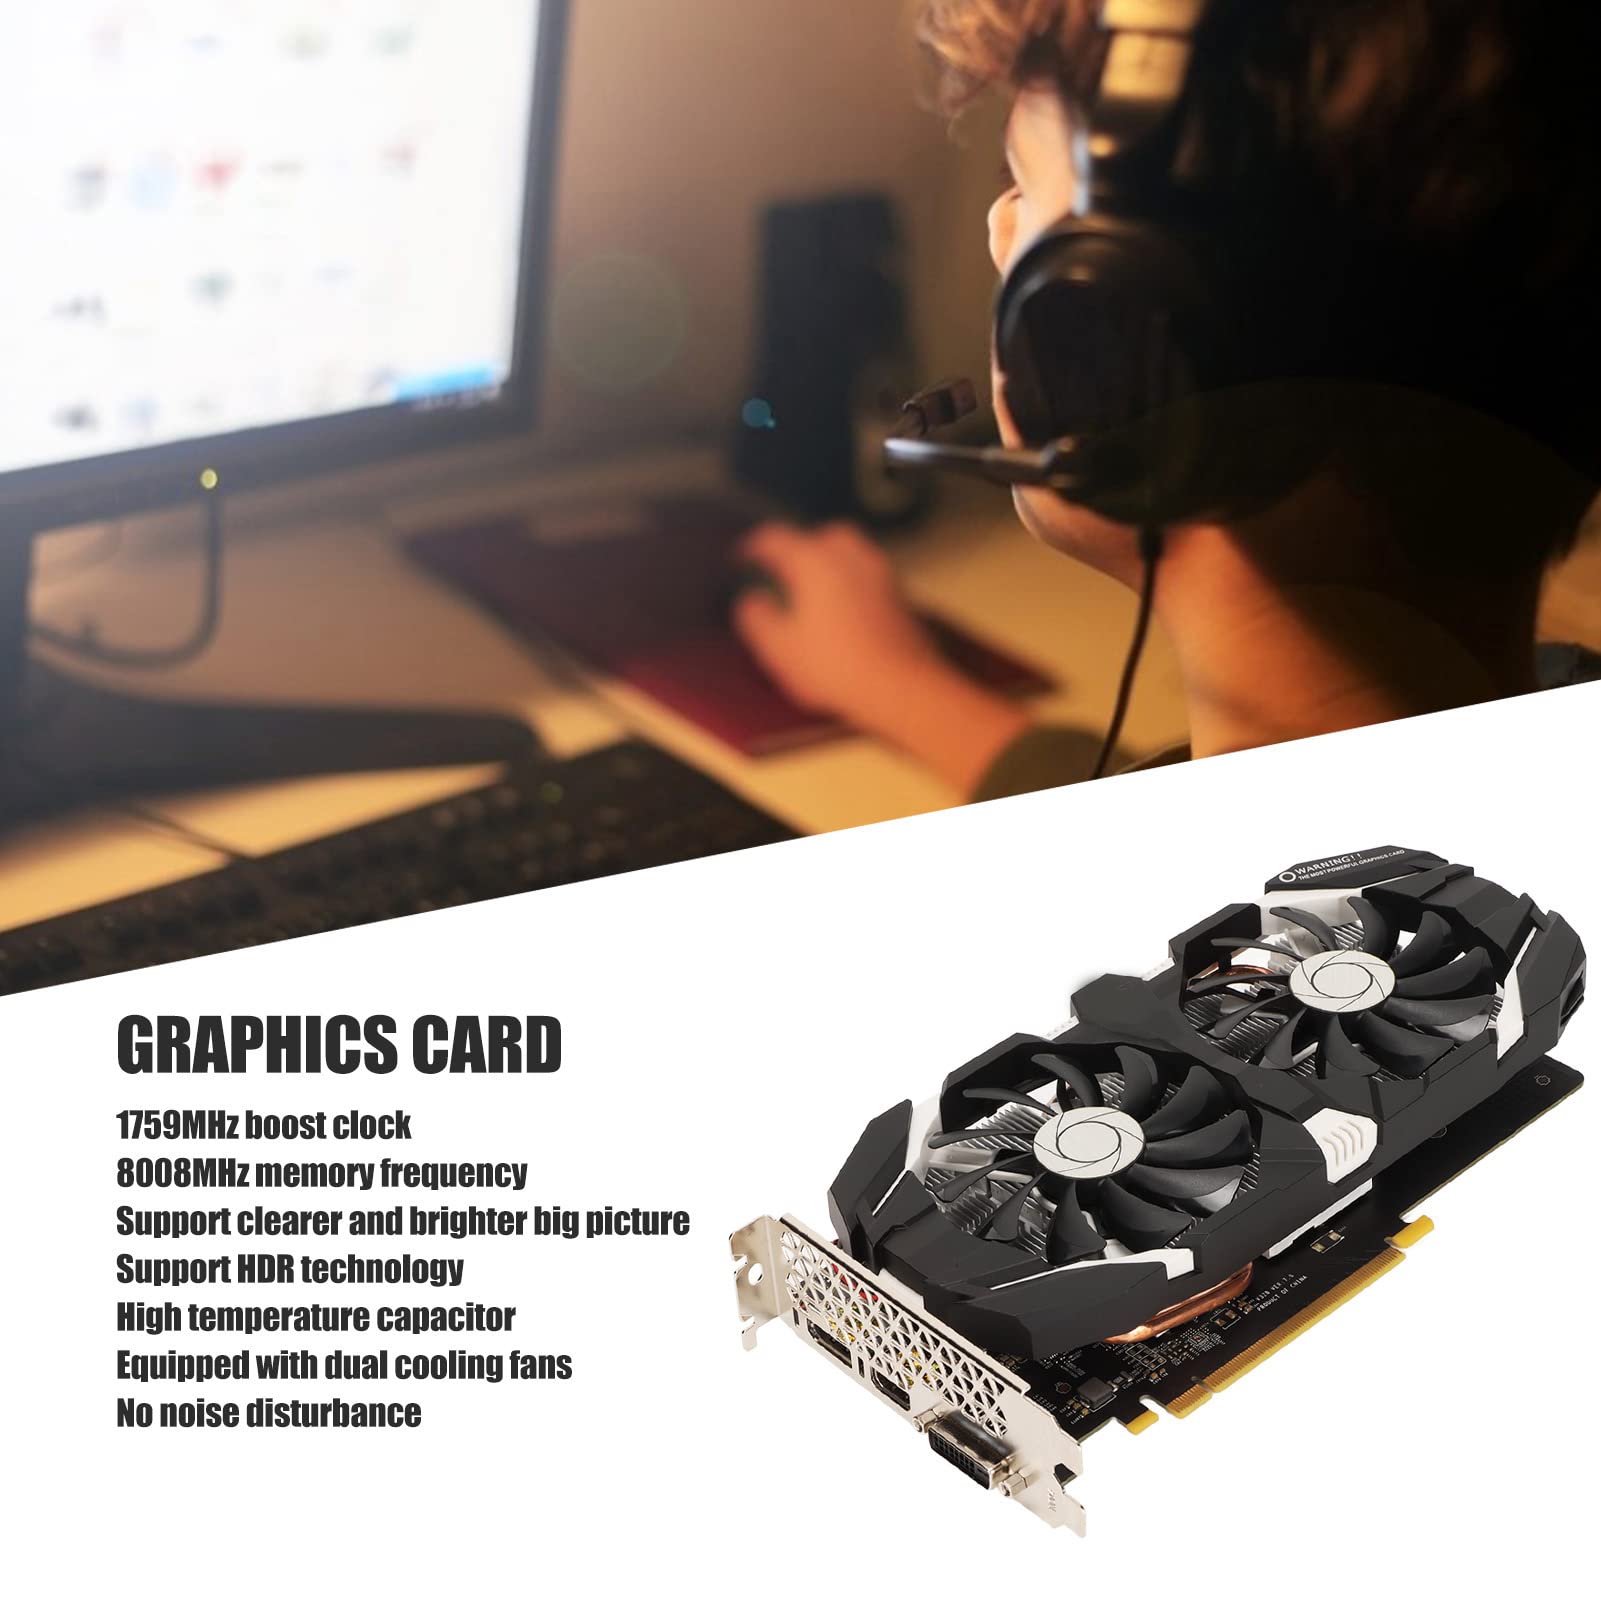 GTX 1060 Graphics Card, Computer Graphics Card 6GB GDDR5 192bit with Dual Fans 4K HDR Technology 8008MHz Gaming Graphics Card with HDMI DVI DP Display Interface(6GB)